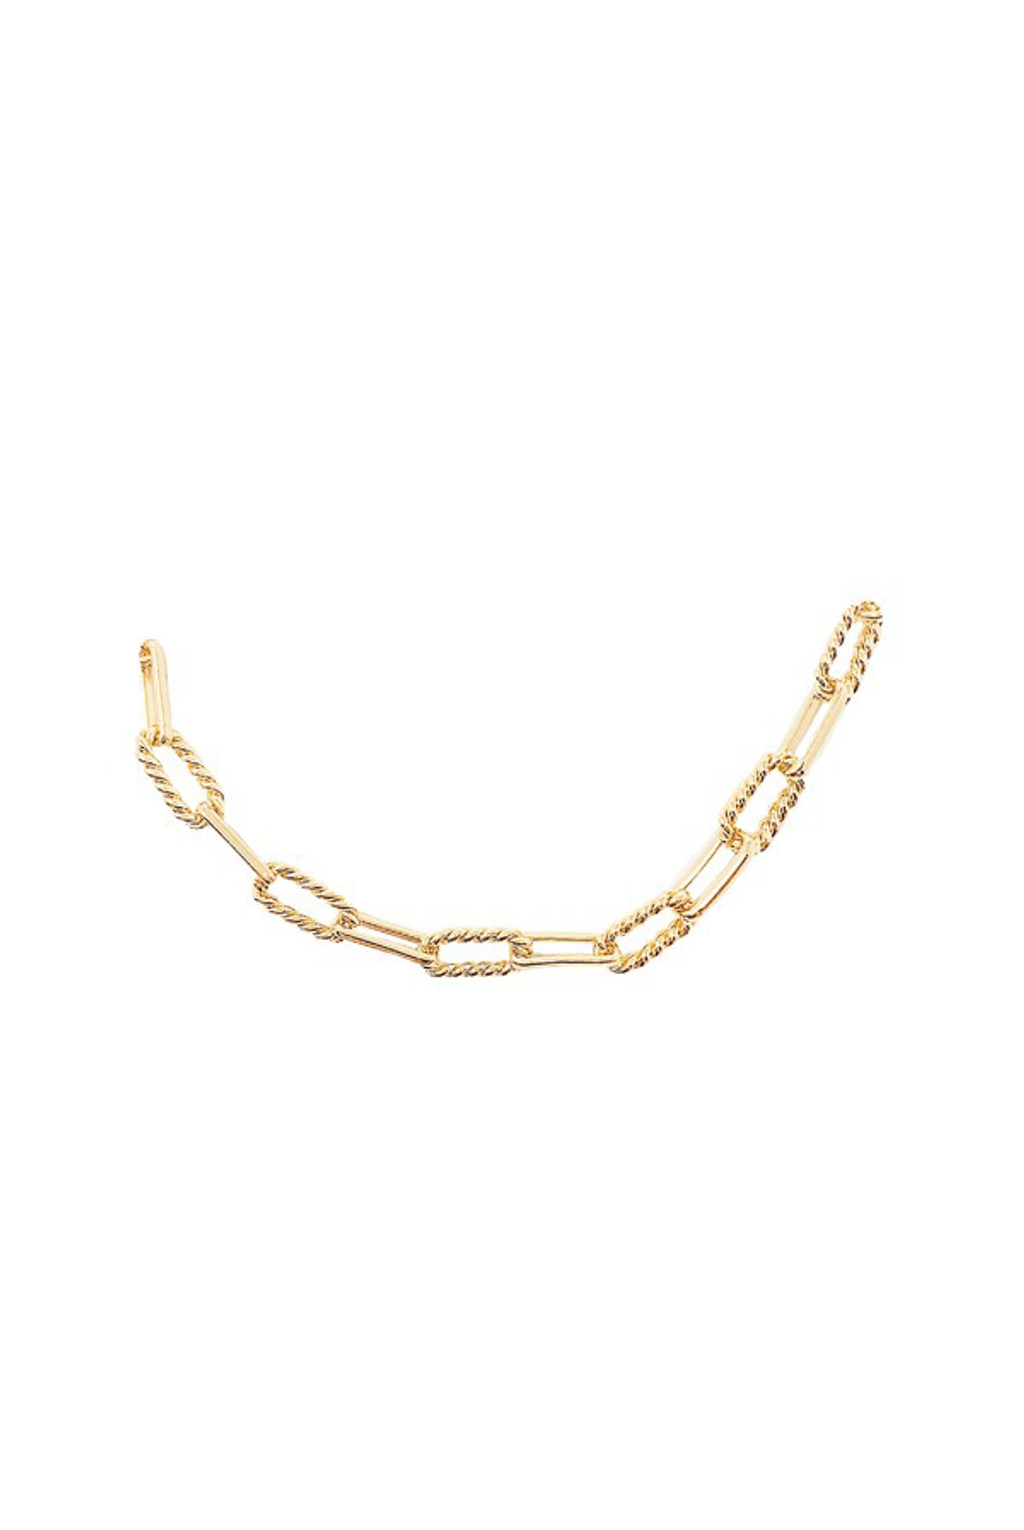 Elianna Gold Filled Braided Link Necklace